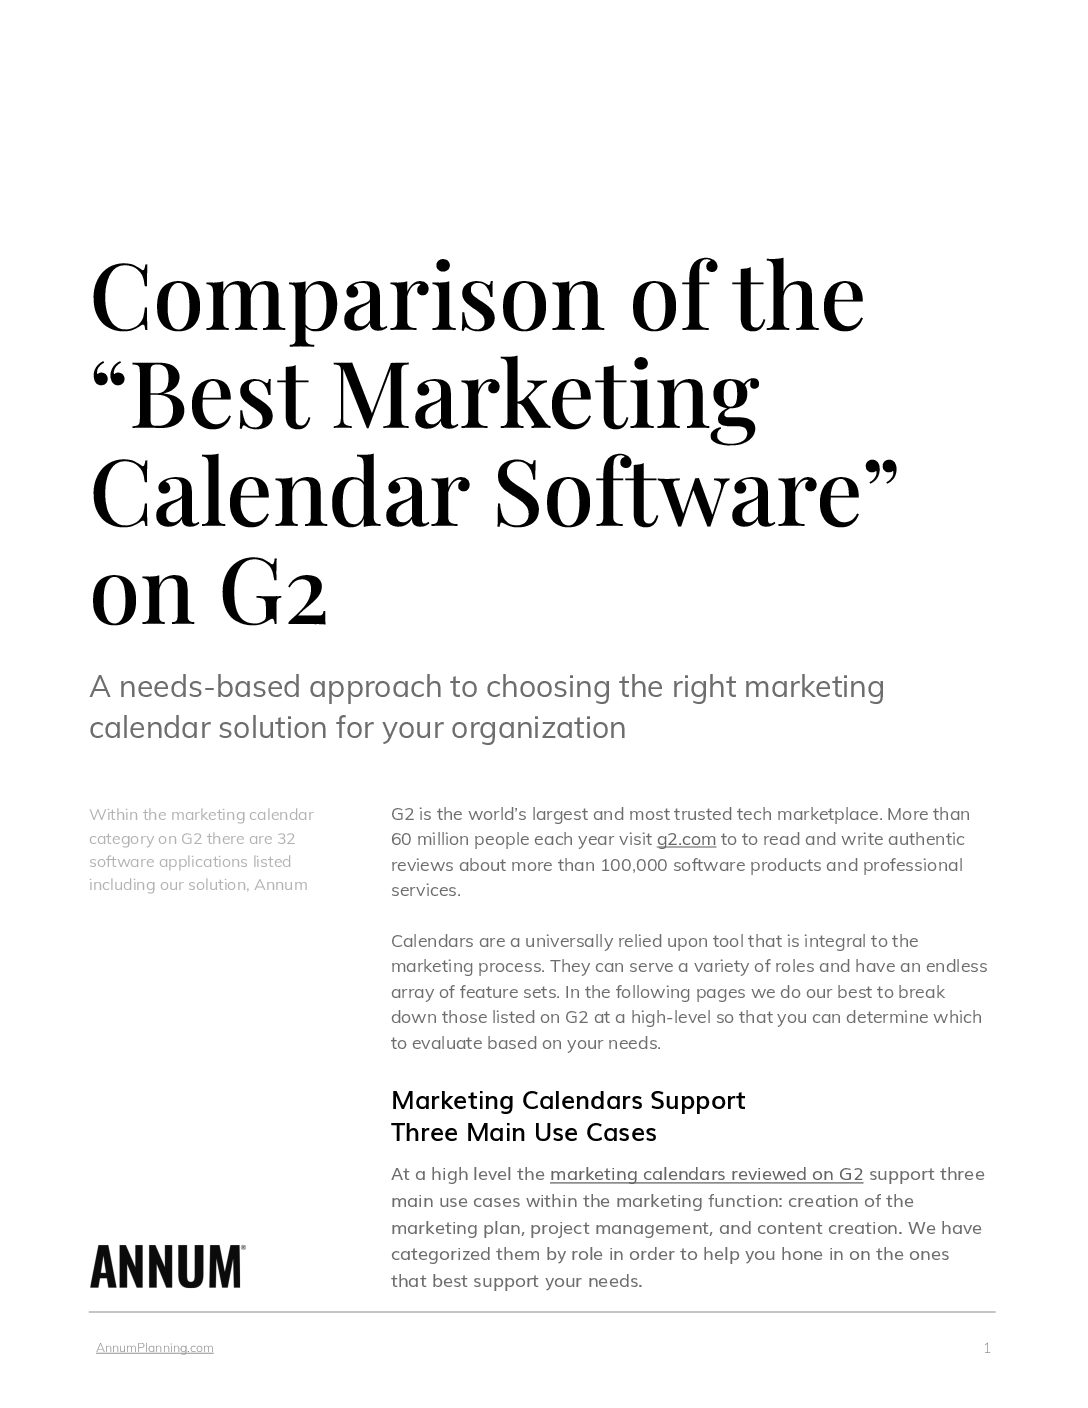 Comparison of the Best Marketing Calendars on G2